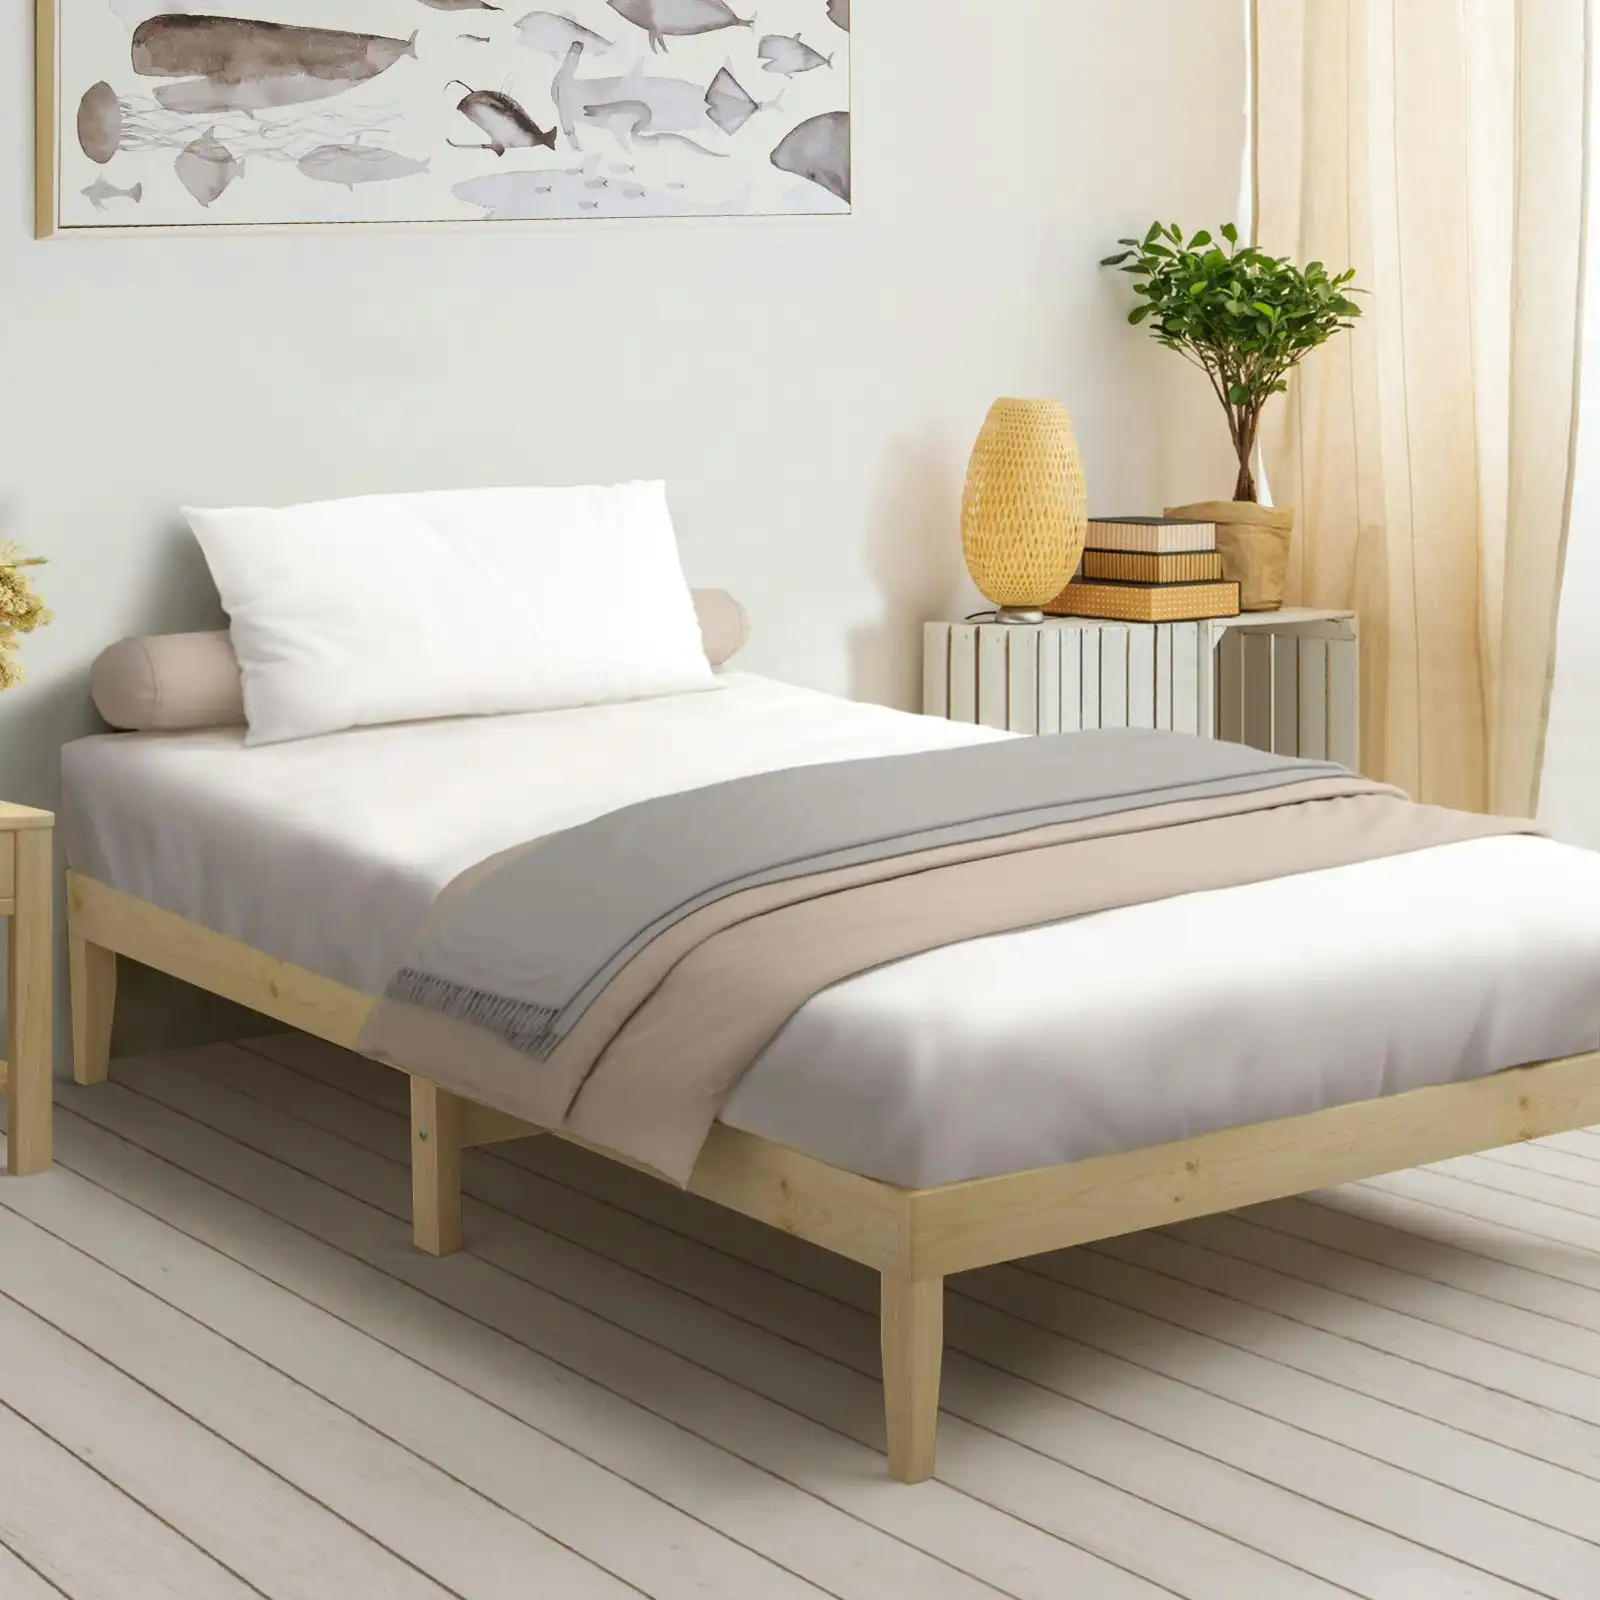 Oikiture Bed Frame Single Size Wooden Bed Base A8